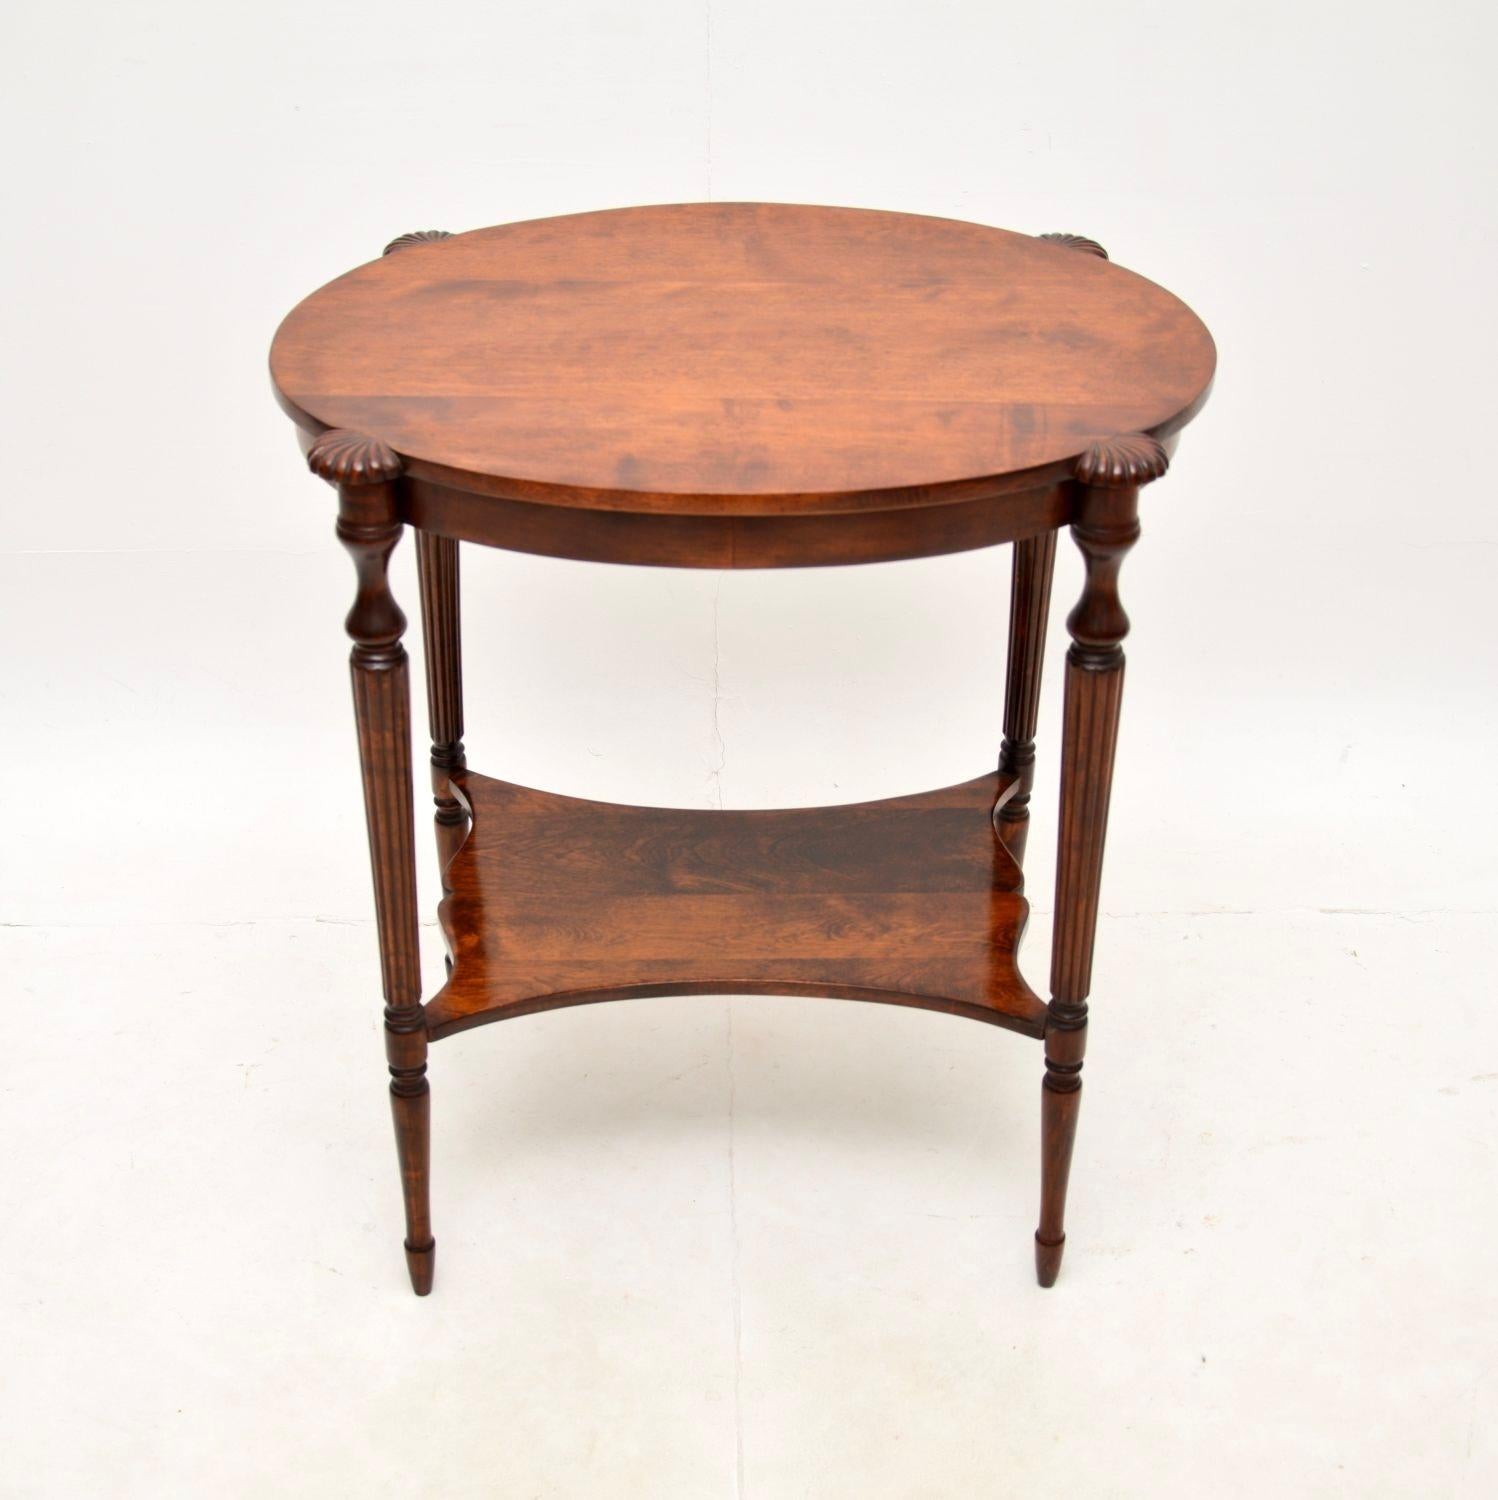 A smart and very well made antique Edwardian occasional table in birch. This was made in England, it dates from around the 1900-1910 period.

The quality is fantastic, this is a very useful size and looks great from all angles. It is finished